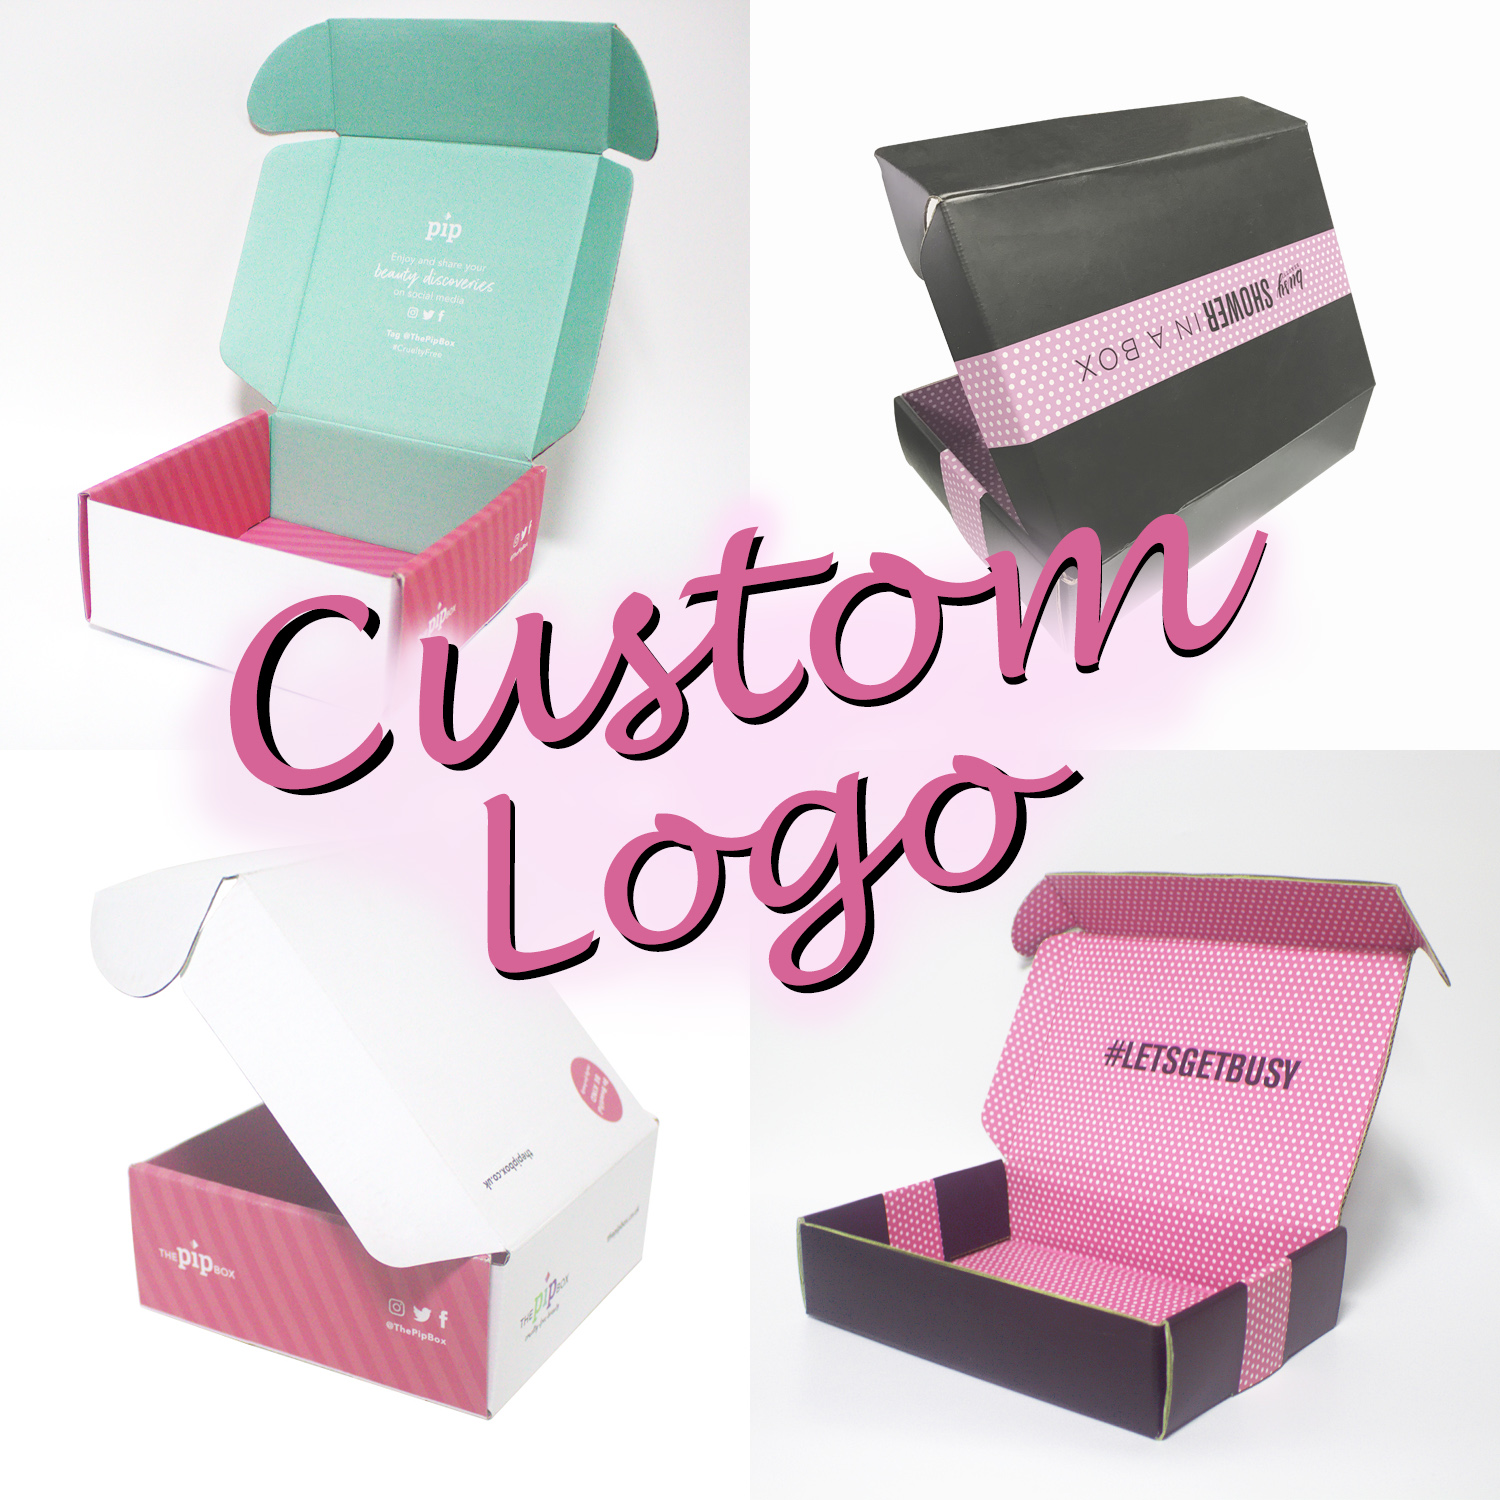 Mailer Box Manufacture Customized Colored Mailer Boxes With Custom Logo Printed, Durable Apparel Packaging Boxes For Storage